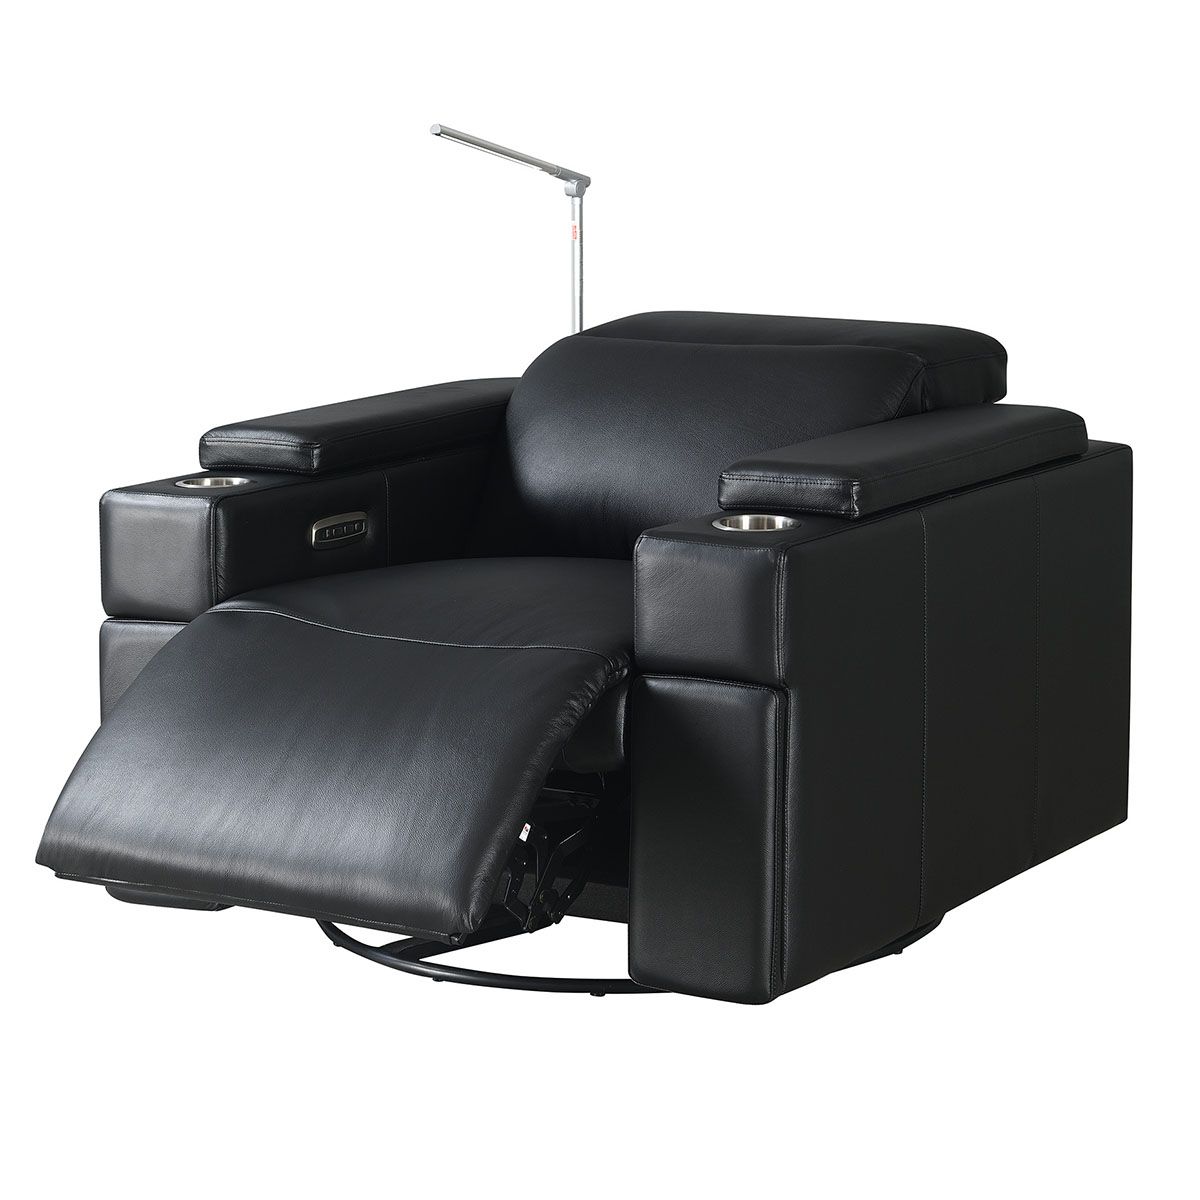 RowOne Calveri - Black Top Grain Leather w/ Matching Vinyl - Single Chair w/ Swivel Base - angled front view - opened